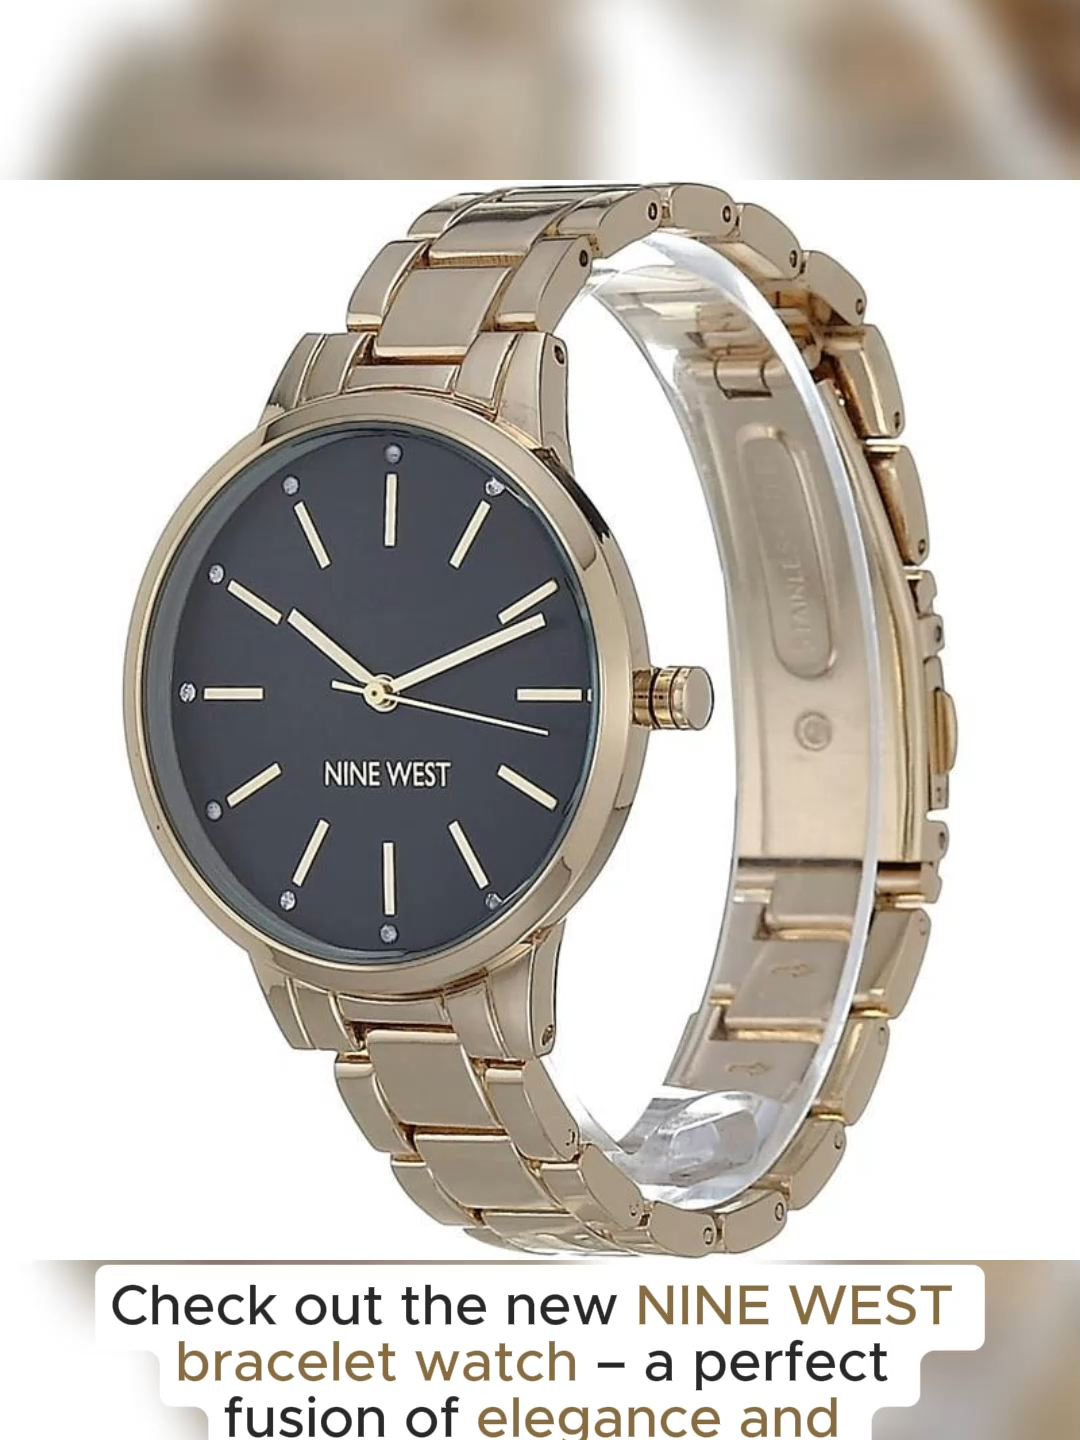 Nine West Women's Crystal Accented Bracelet Watch - Glossy Black Dial with Gold-Tone Hands and Crystal Markers